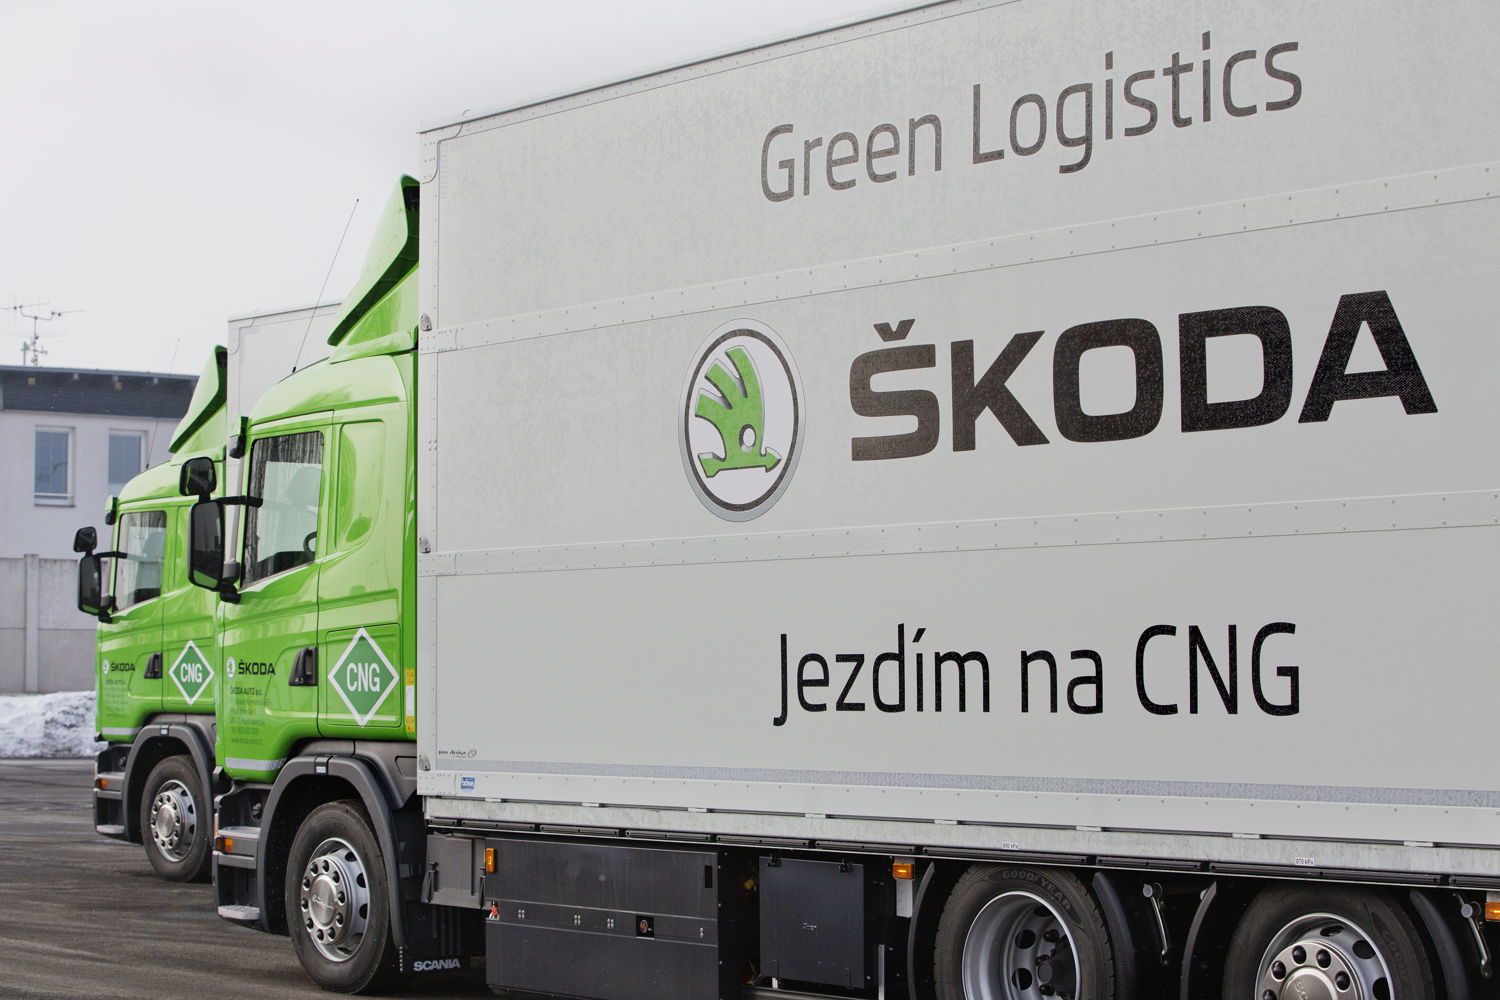 Following a two-month trial period, two lorries with CNG drive are now being used in daily operations at the ŠKODA headquarters in Mladá Boleslav.